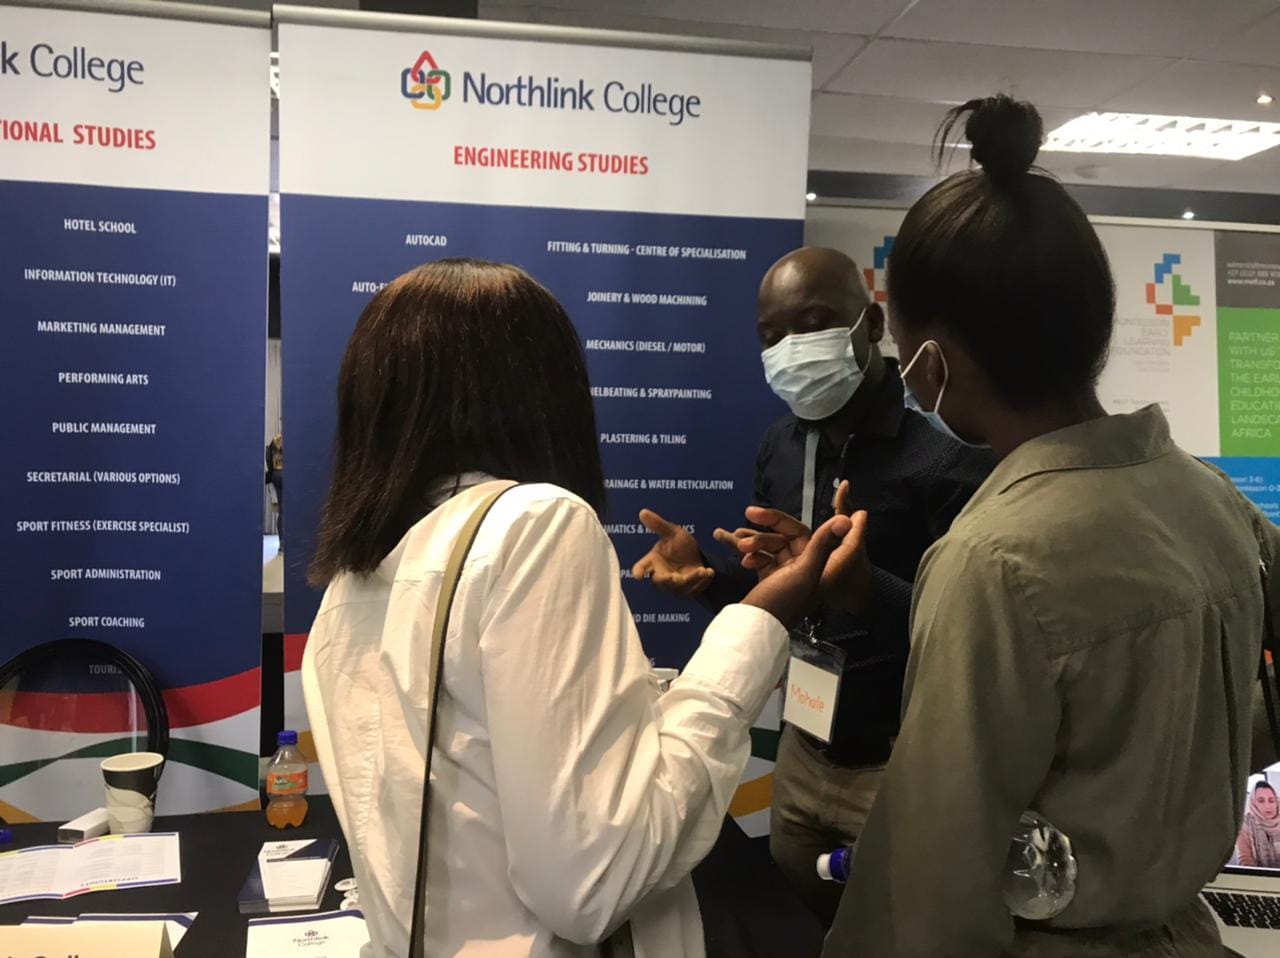 Prospective students getting information from Northlink College.